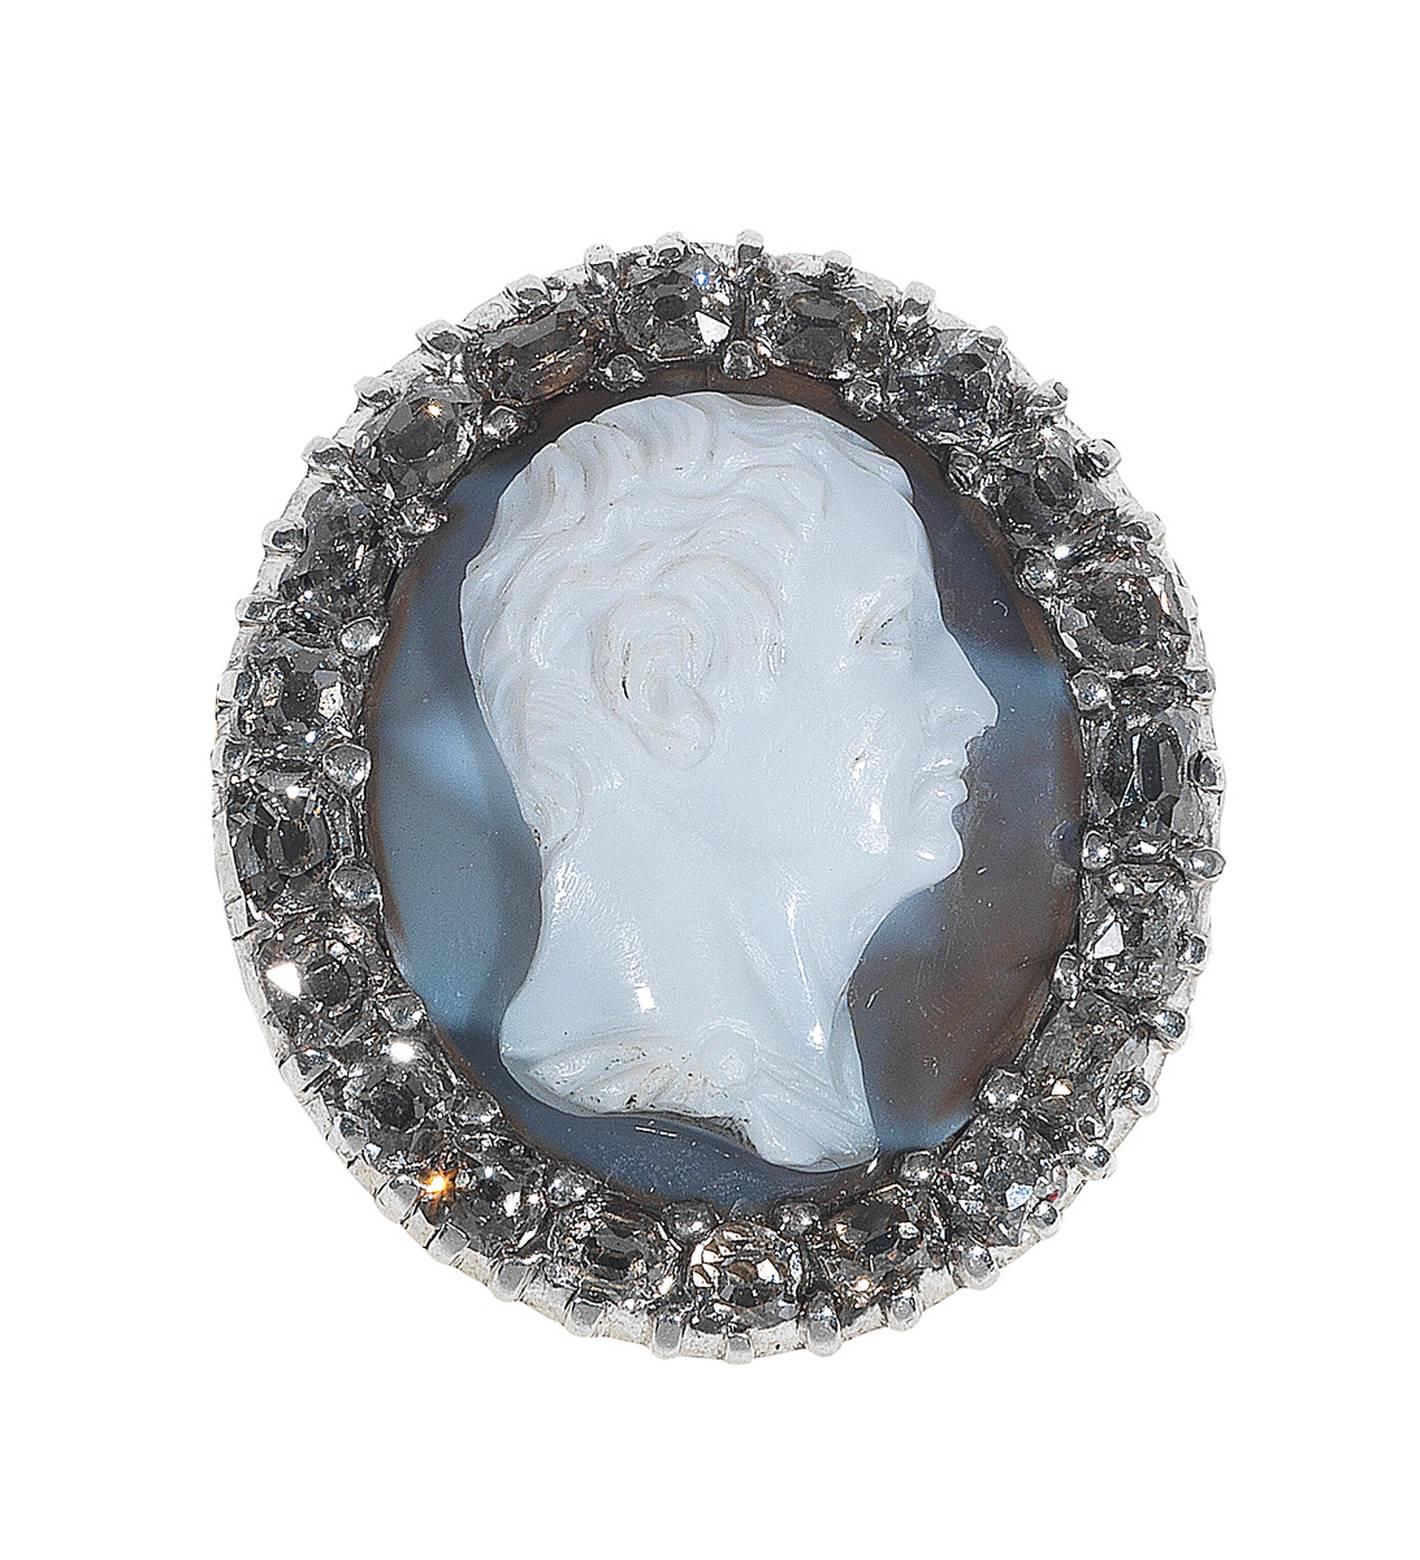 
The carved onyx cameo most probably depicting the profile of the Roman poet Gaio Valerio Catullo.

The oval bezel set with an onyx (white upper layer, translucent beige lower layer). The carving depicts a man in profile facing to the viewer’s